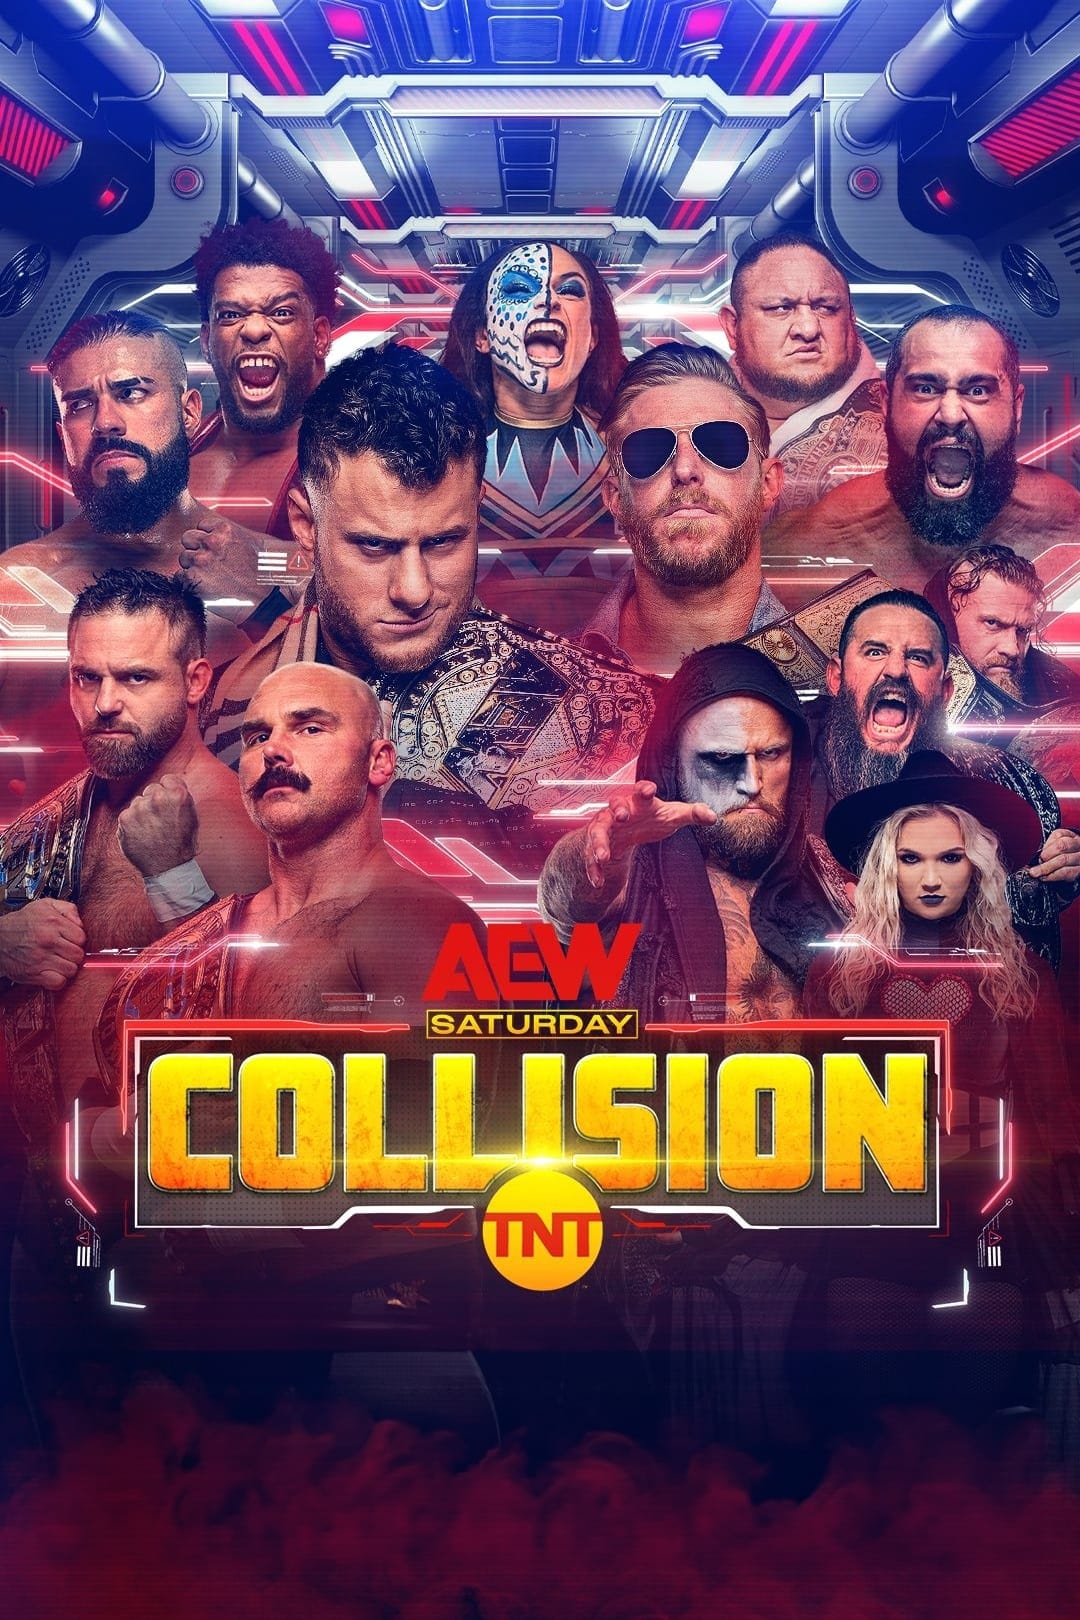 AEW Collision poster